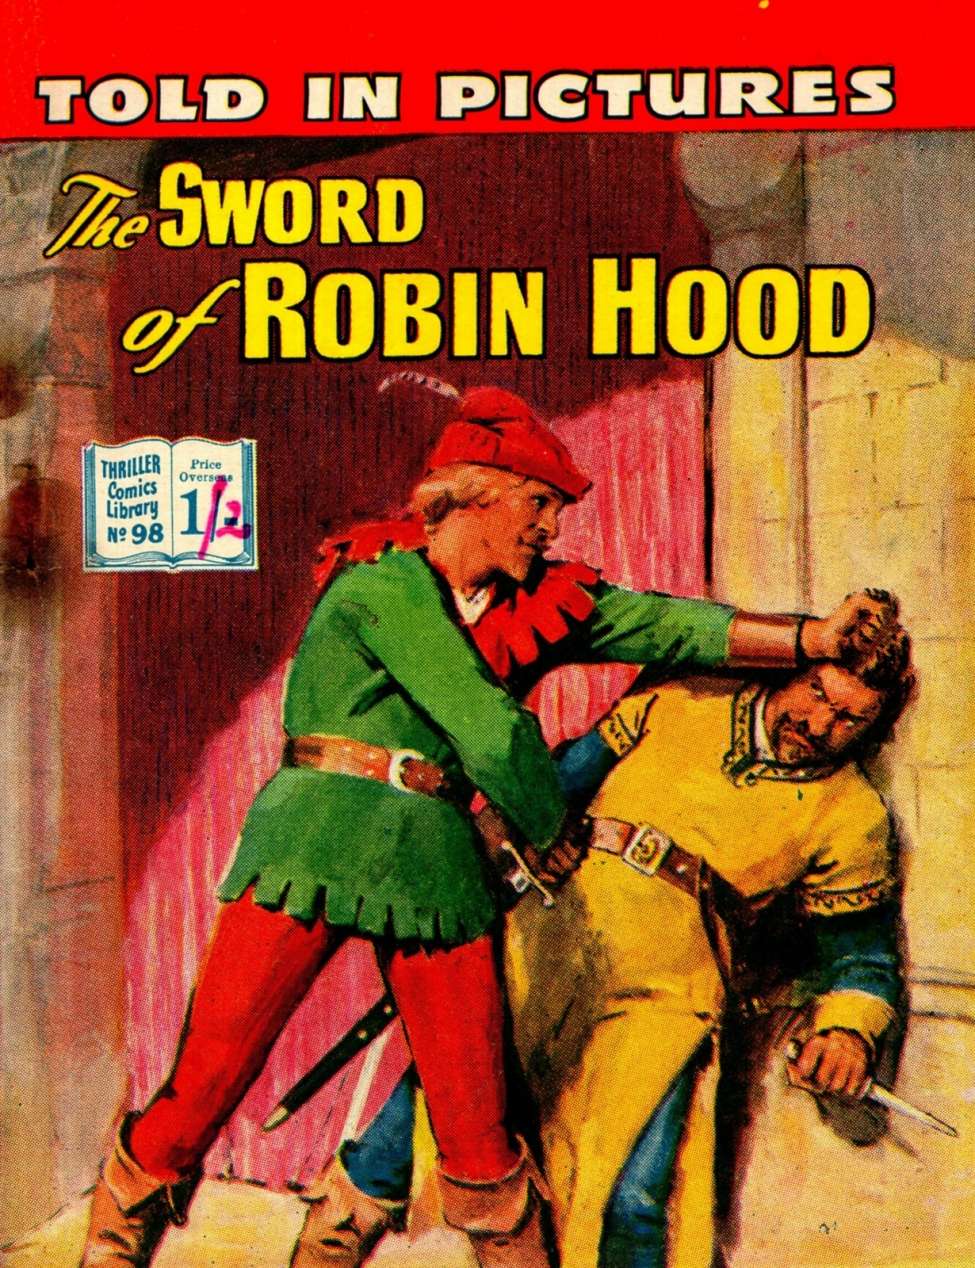 Book Cover For Thriller Comics Library 98 - The Sword of Robin Hood